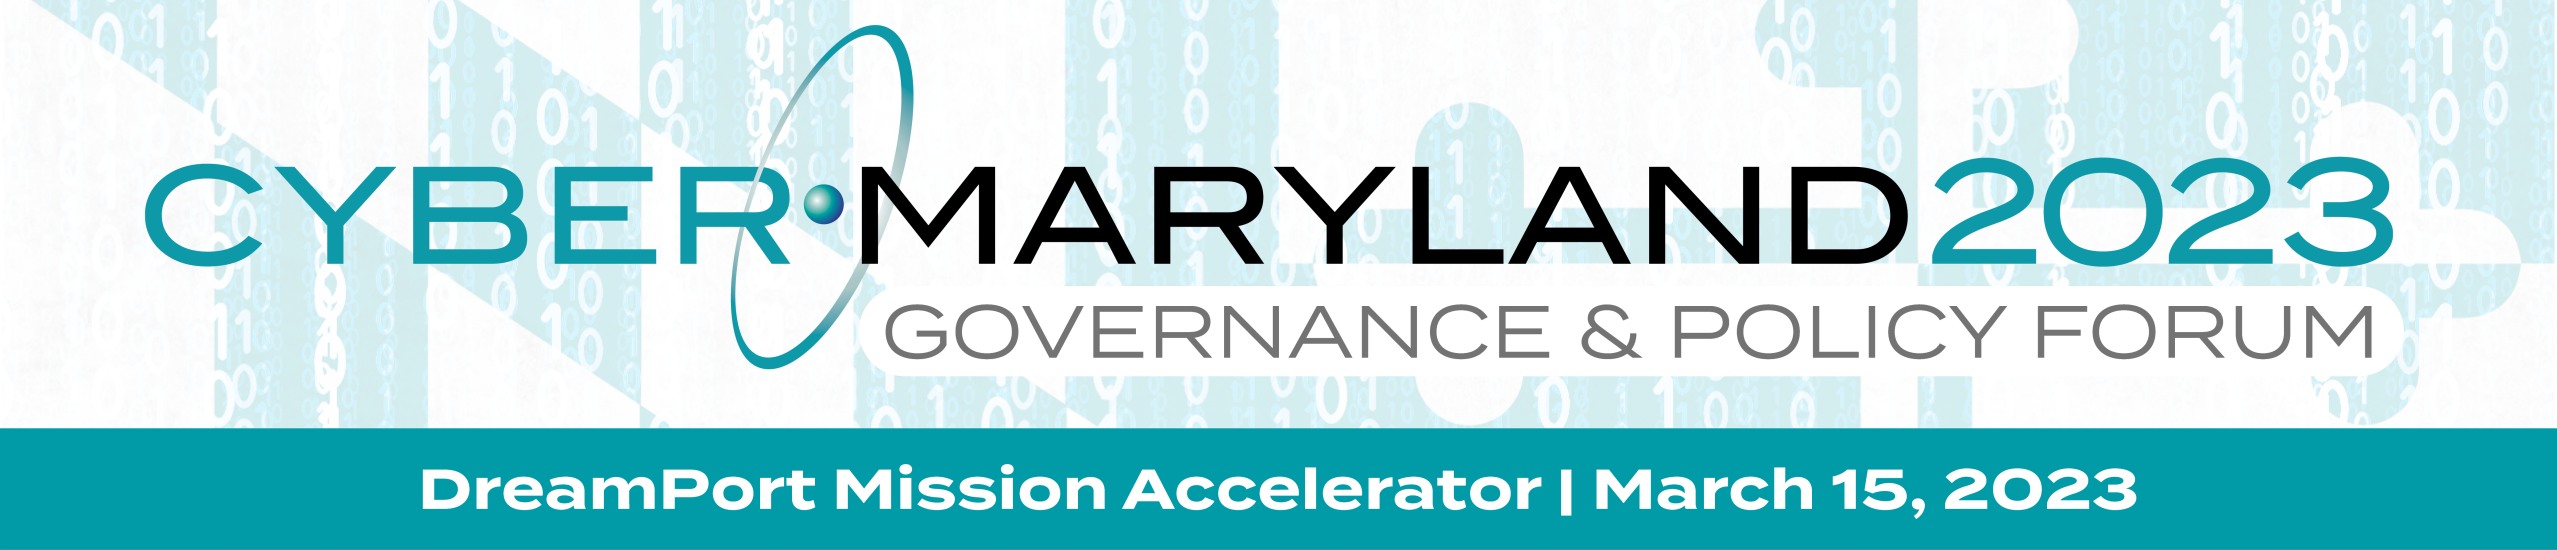 2023 CyberMaryland Governance and Policy Forum